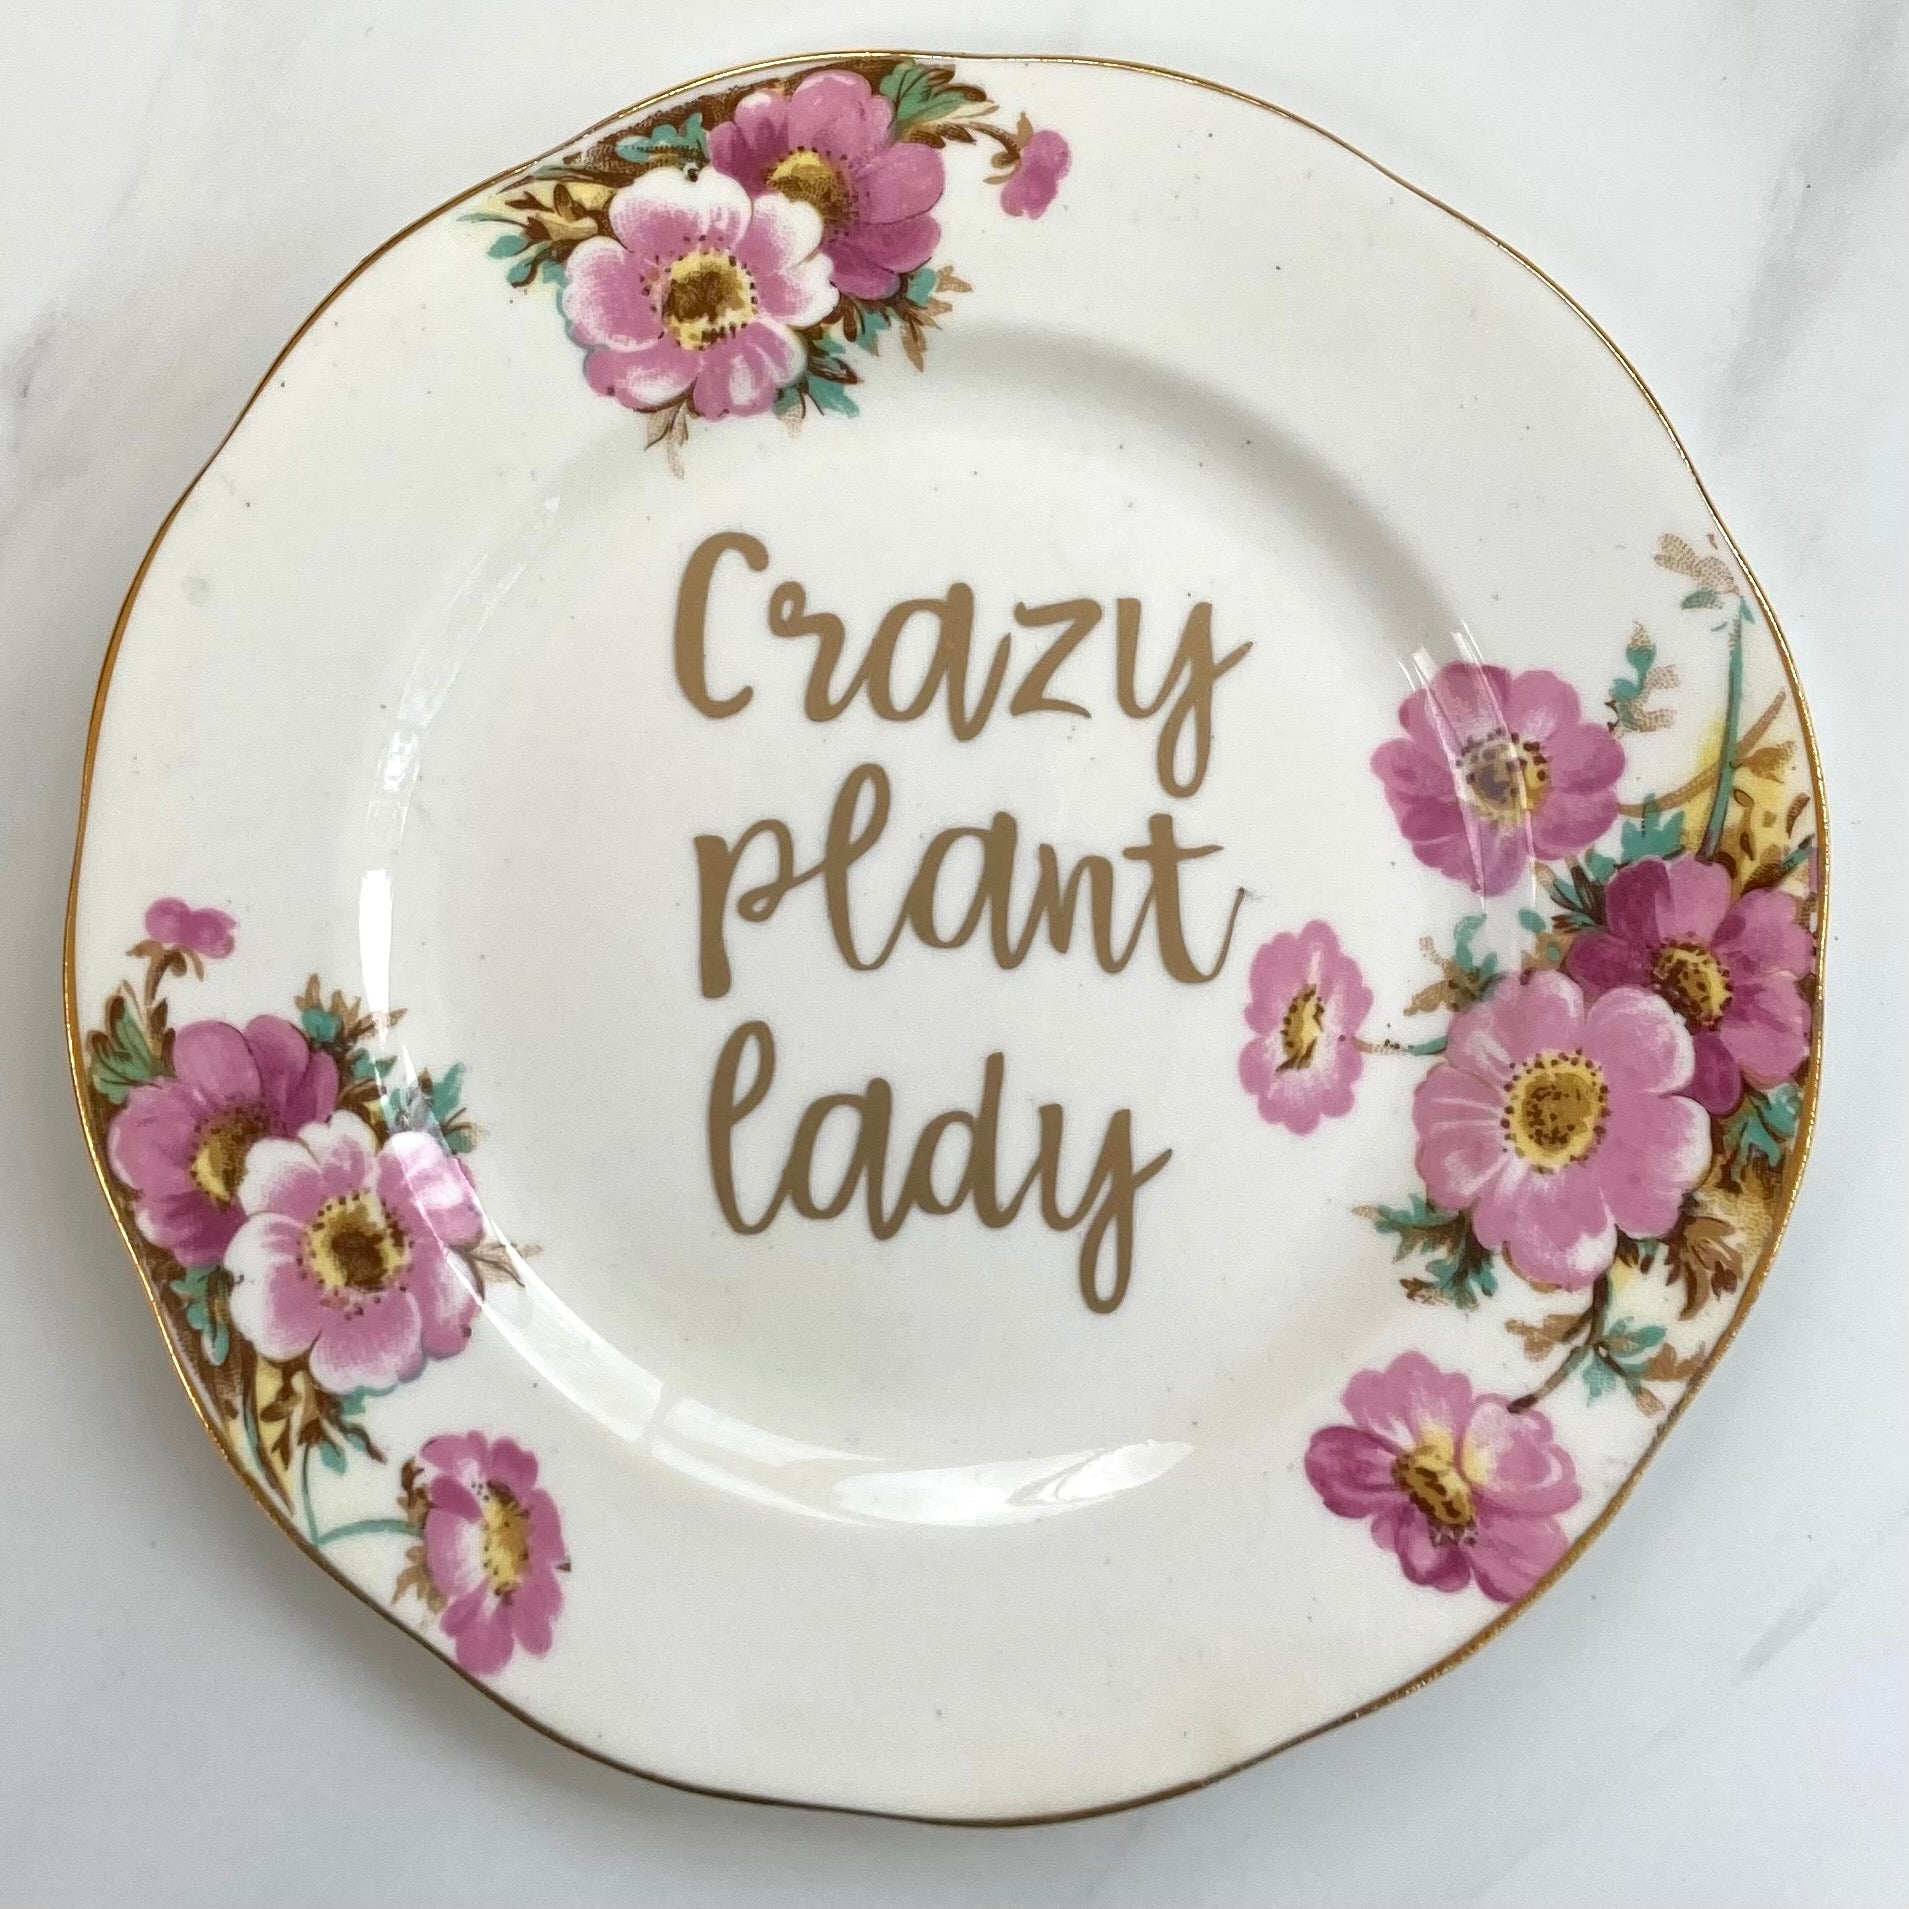 ‘Crazy plant lady’ quote on plate